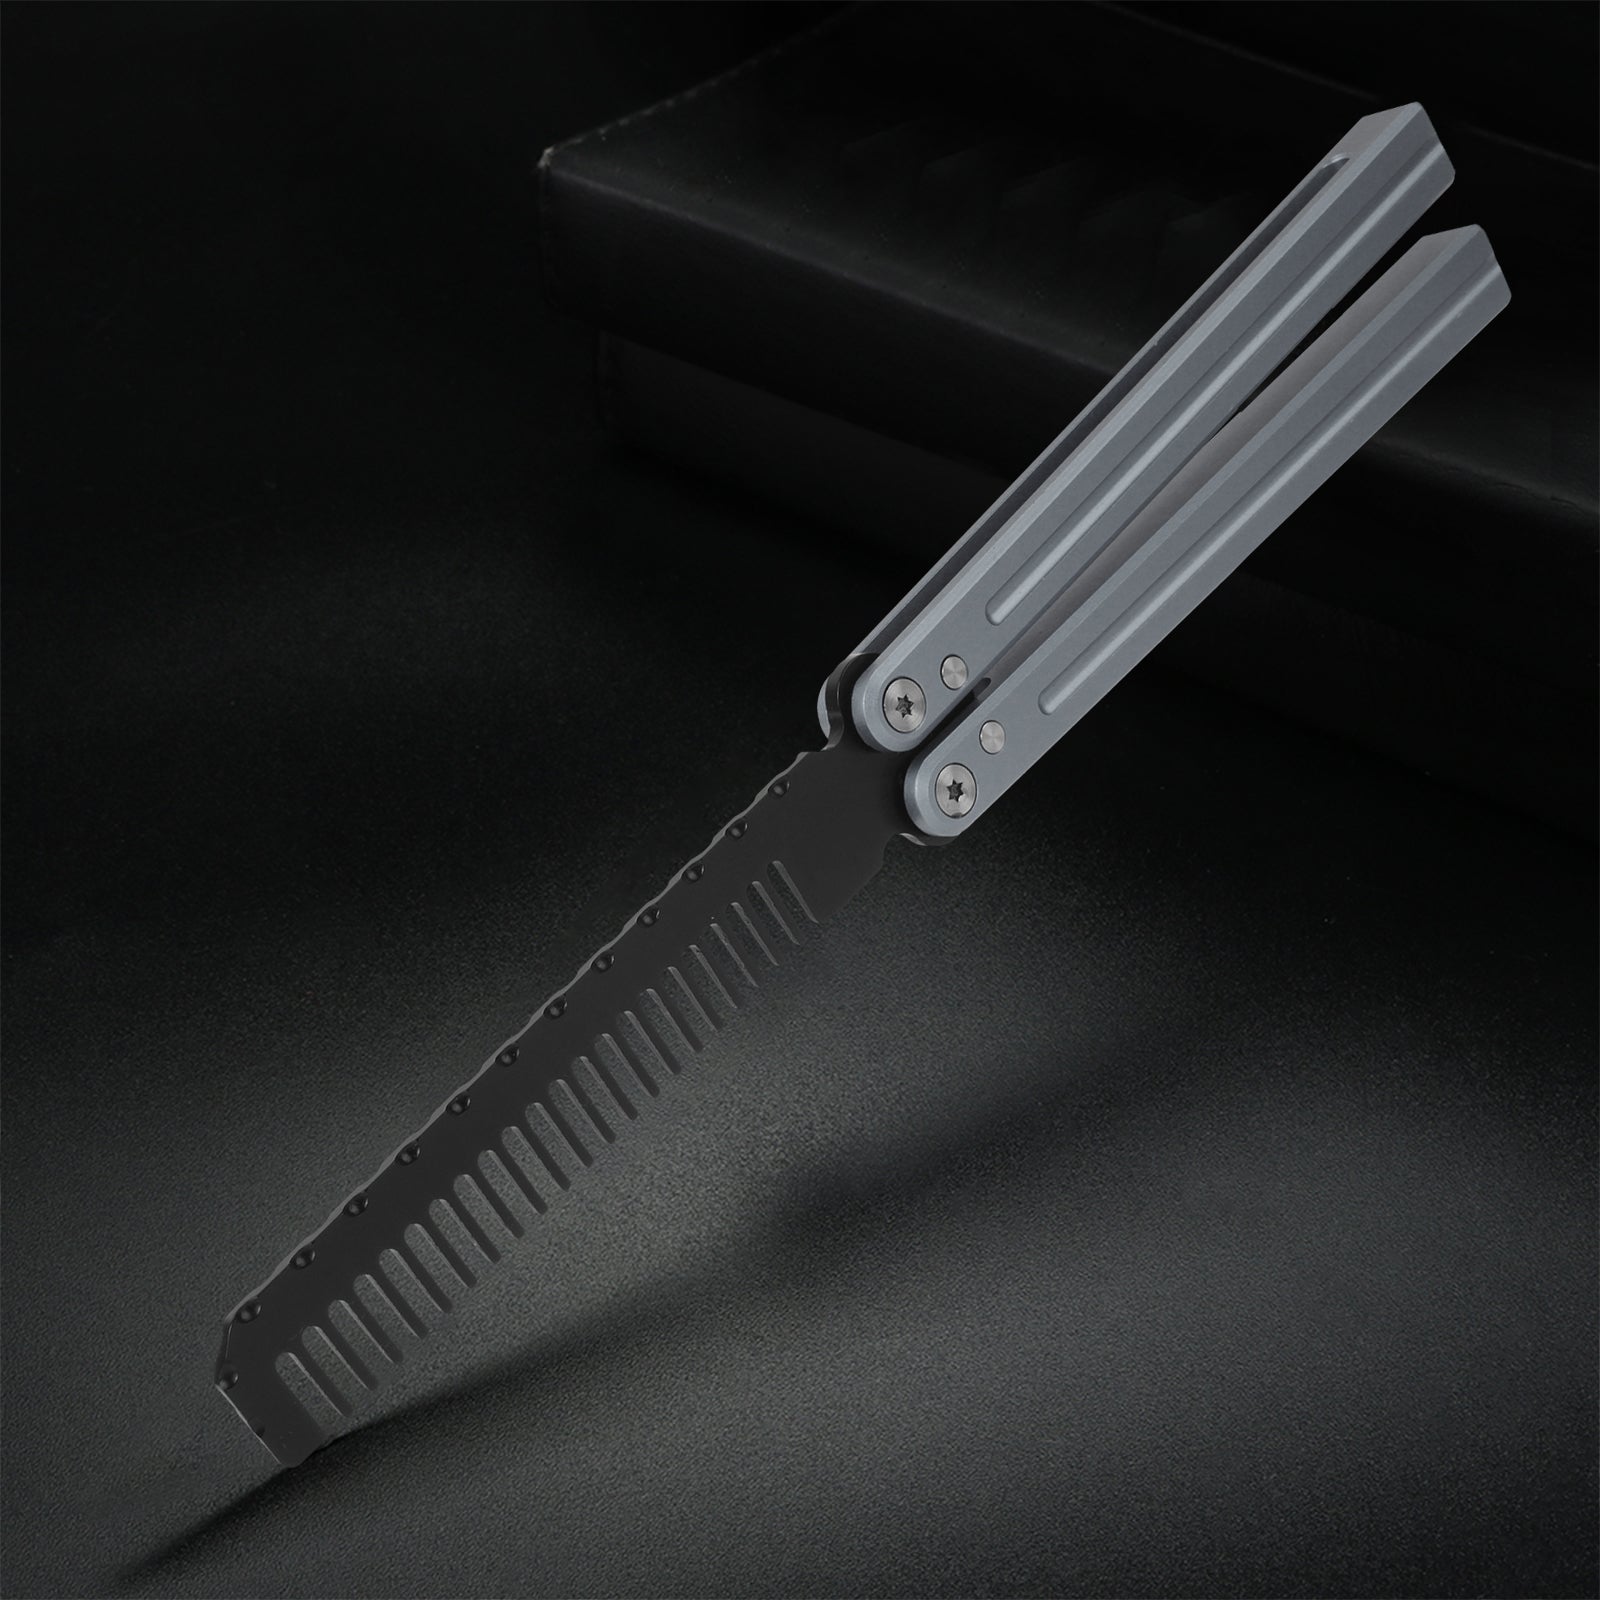 Andux 7075 Aluminum Balisong Butterfly Knife Comb CNC Effective Bushing System Training Tool Lock Free (Silvery) CNC-S01